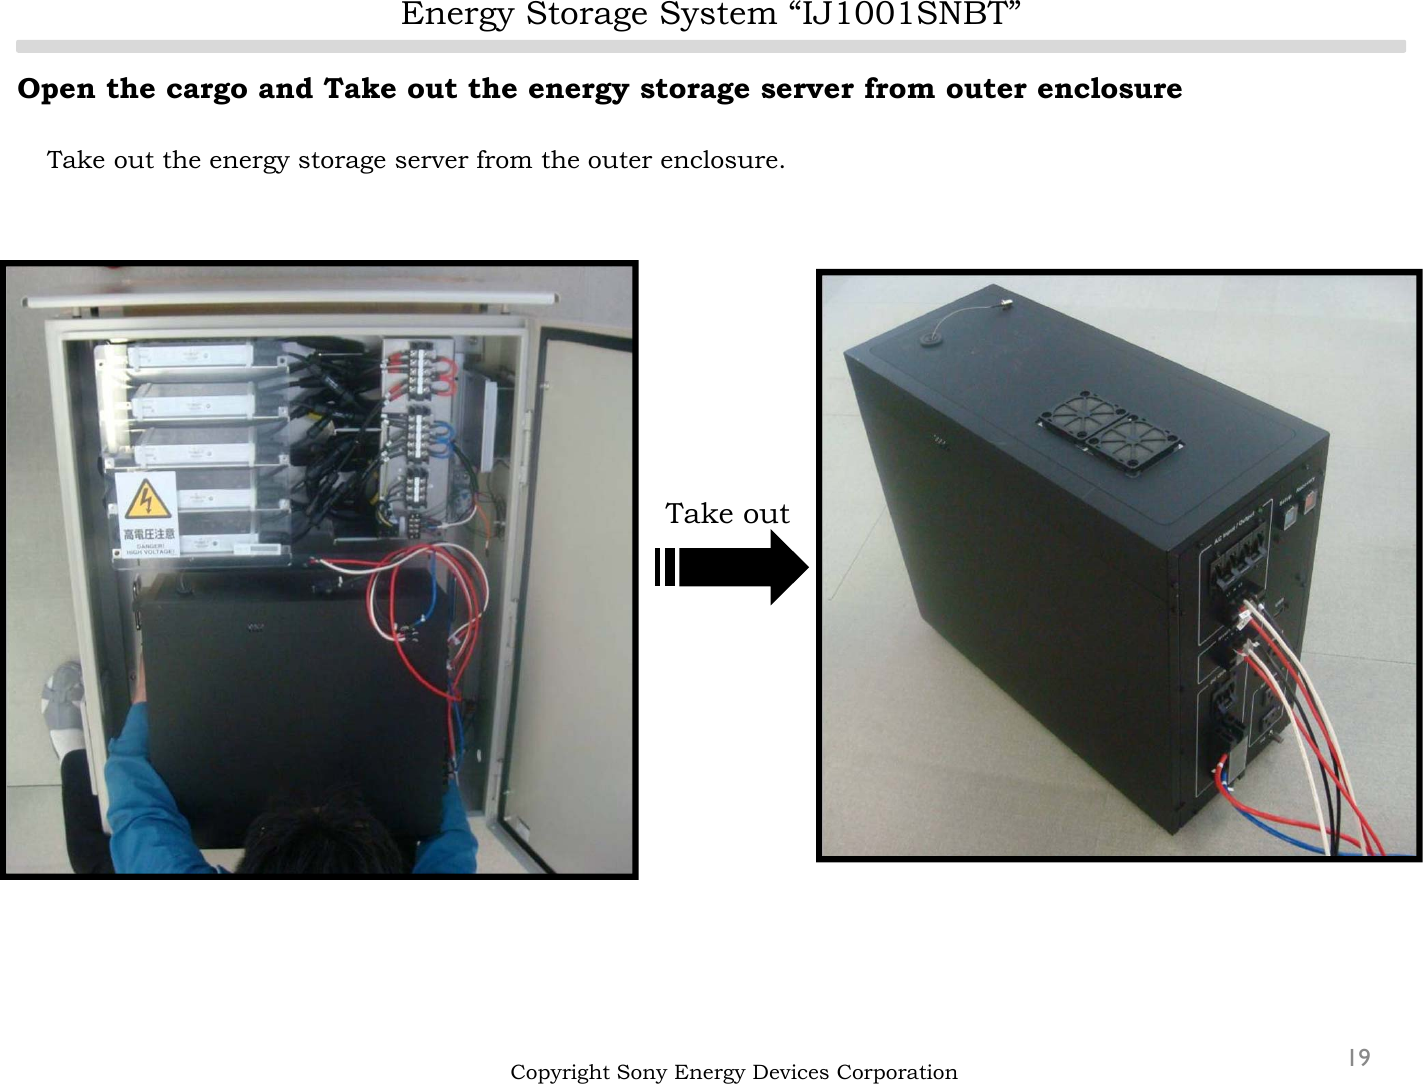 Energy Storage System “IJ1001SNBT”19Open the cargo and Take out the energy storage server from outer enclosureTake out the energy storage server from the outer enclosure.Copyright Sony Energy Devices CorporationTake out